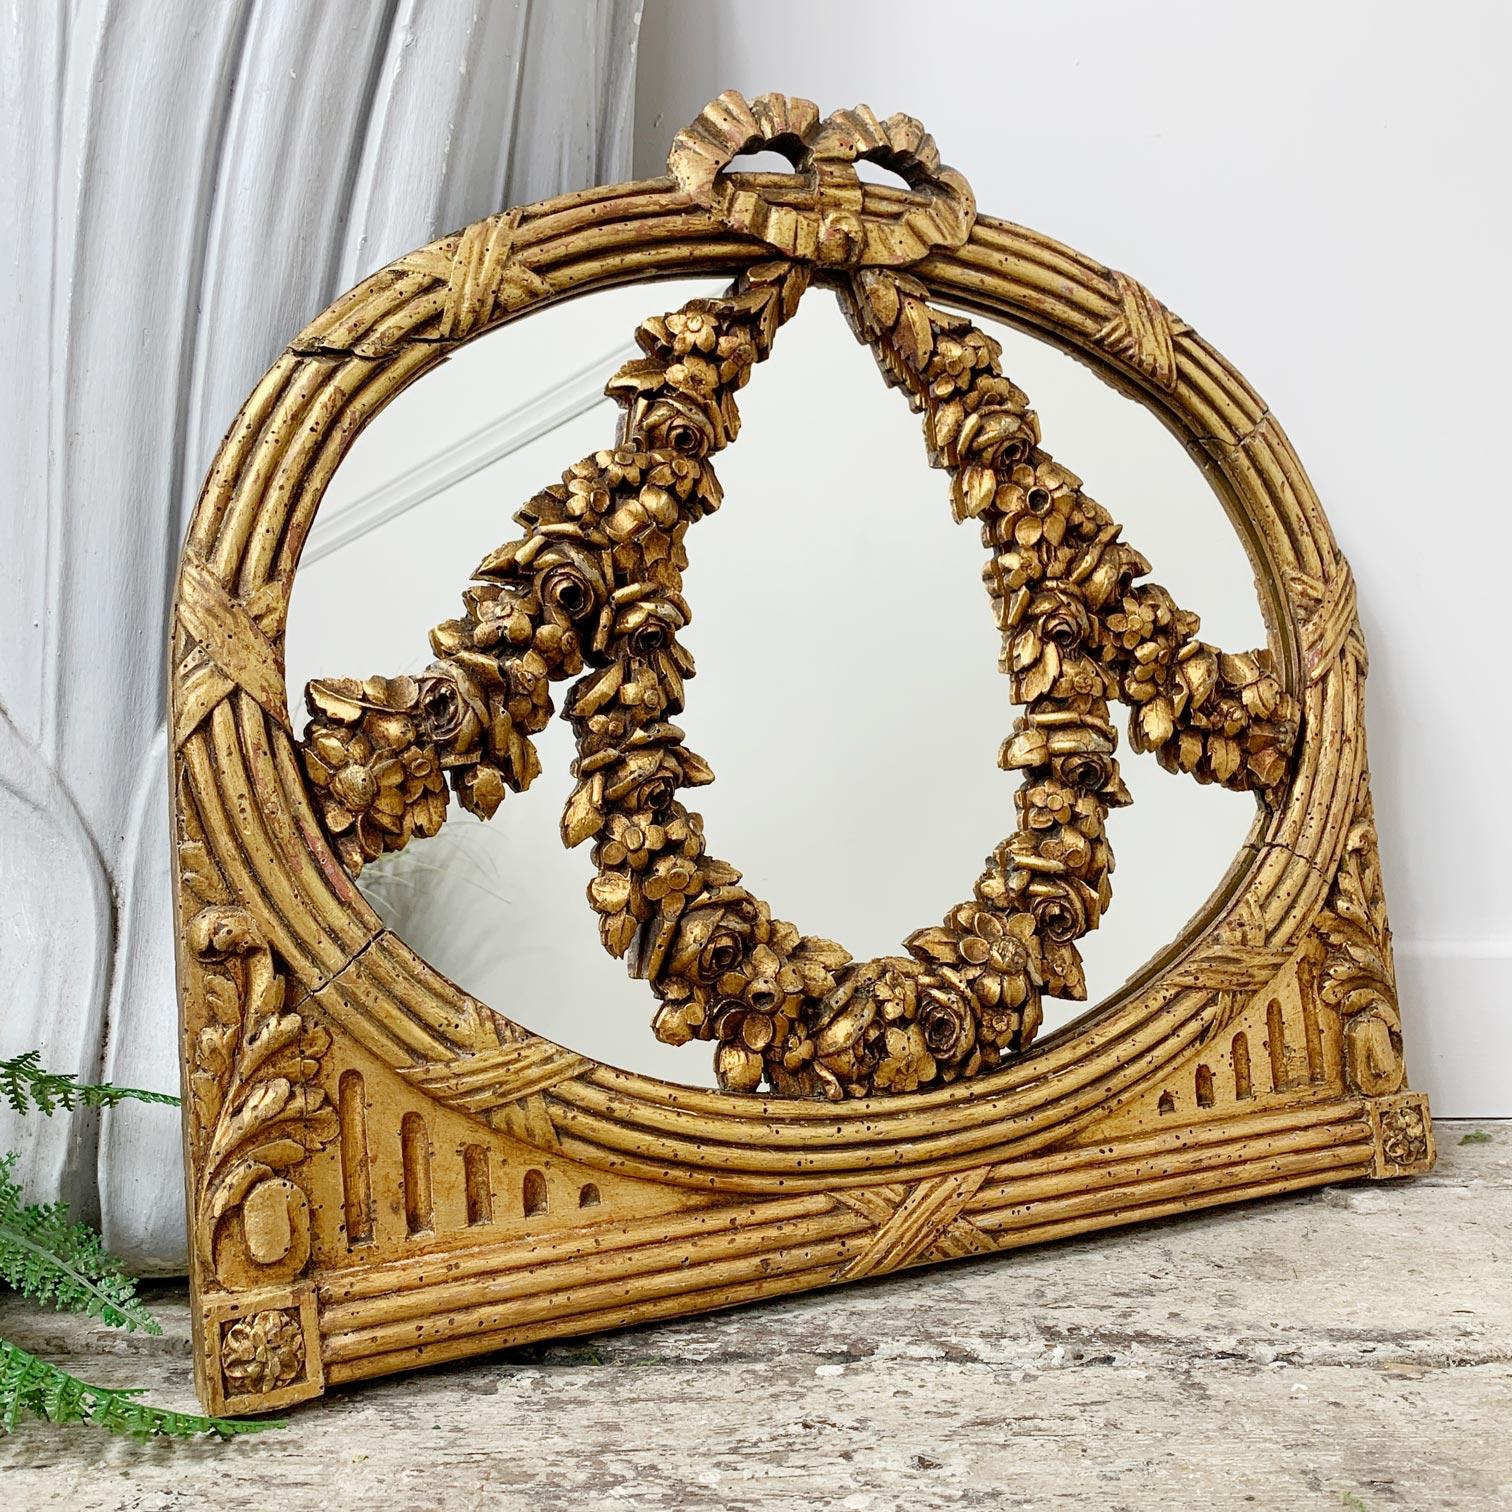 Beautiful and charming later 18th century mirror, the frame in carved gilt wood, with very unusual and intricately carved floral swags to the front that sweep across the mirror face.

The glass mirror plate is a modern replacement, the frame does